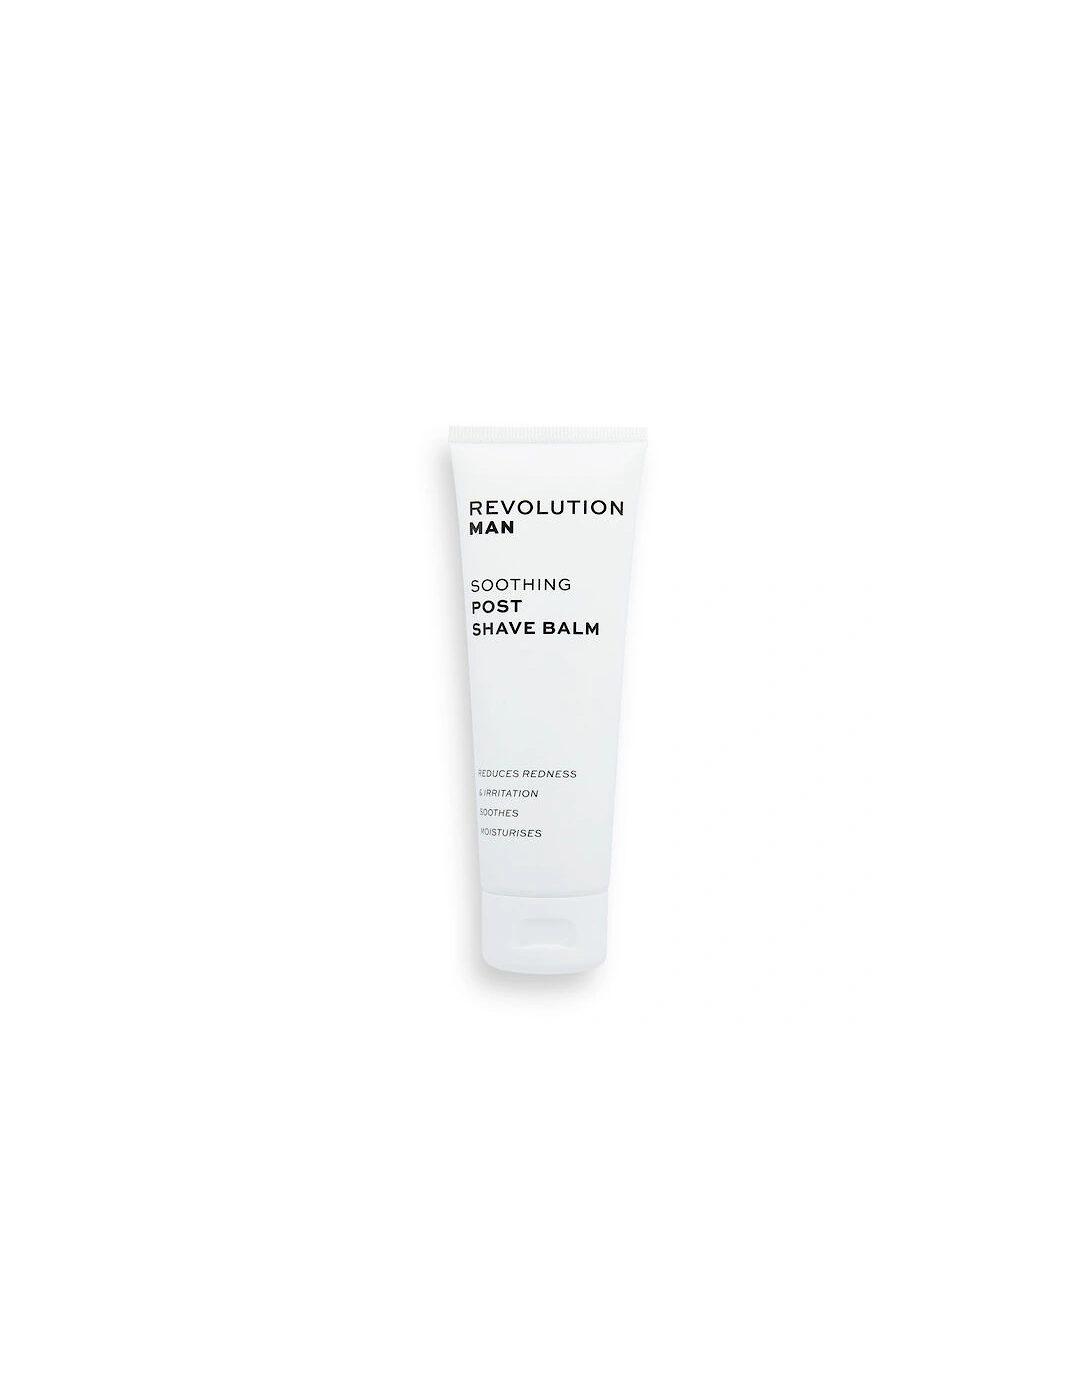 Man Soothing Post Shave Balm, 2 of 1